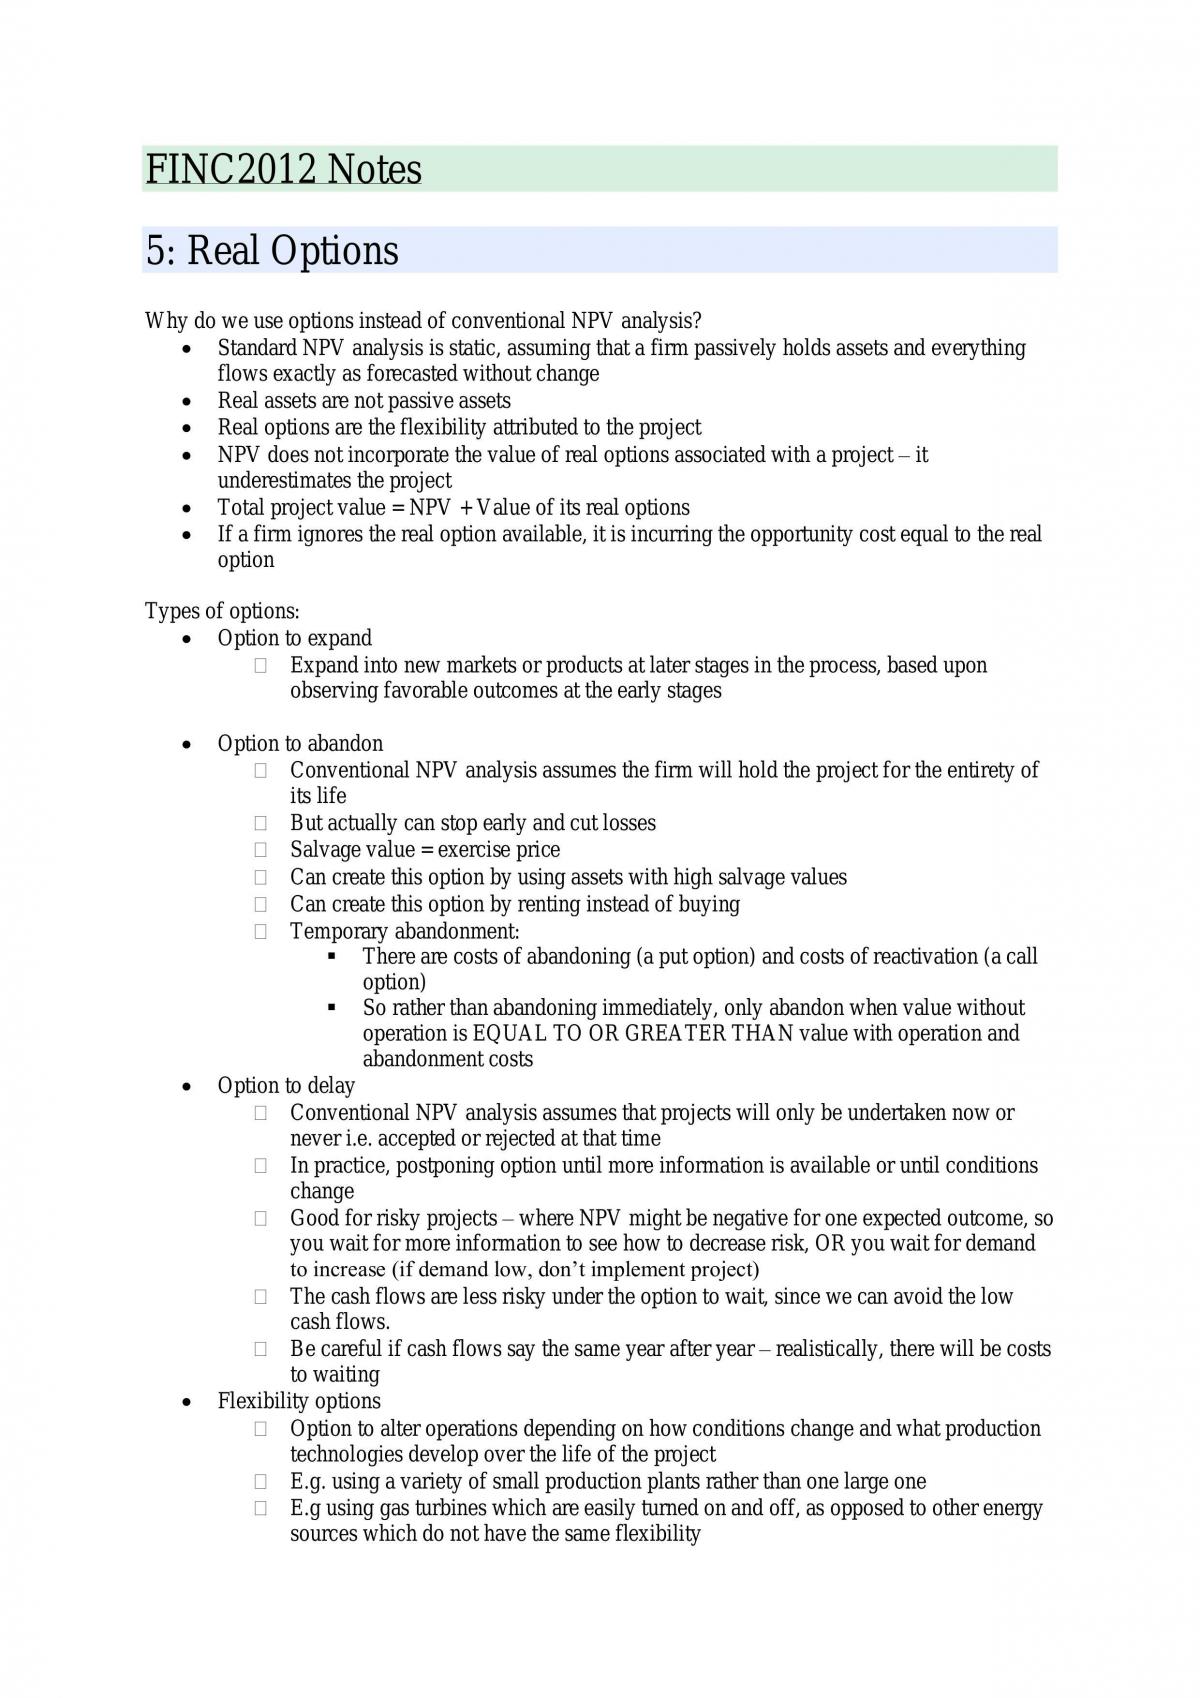 FINC2012 Finals Study Notes - Page 1